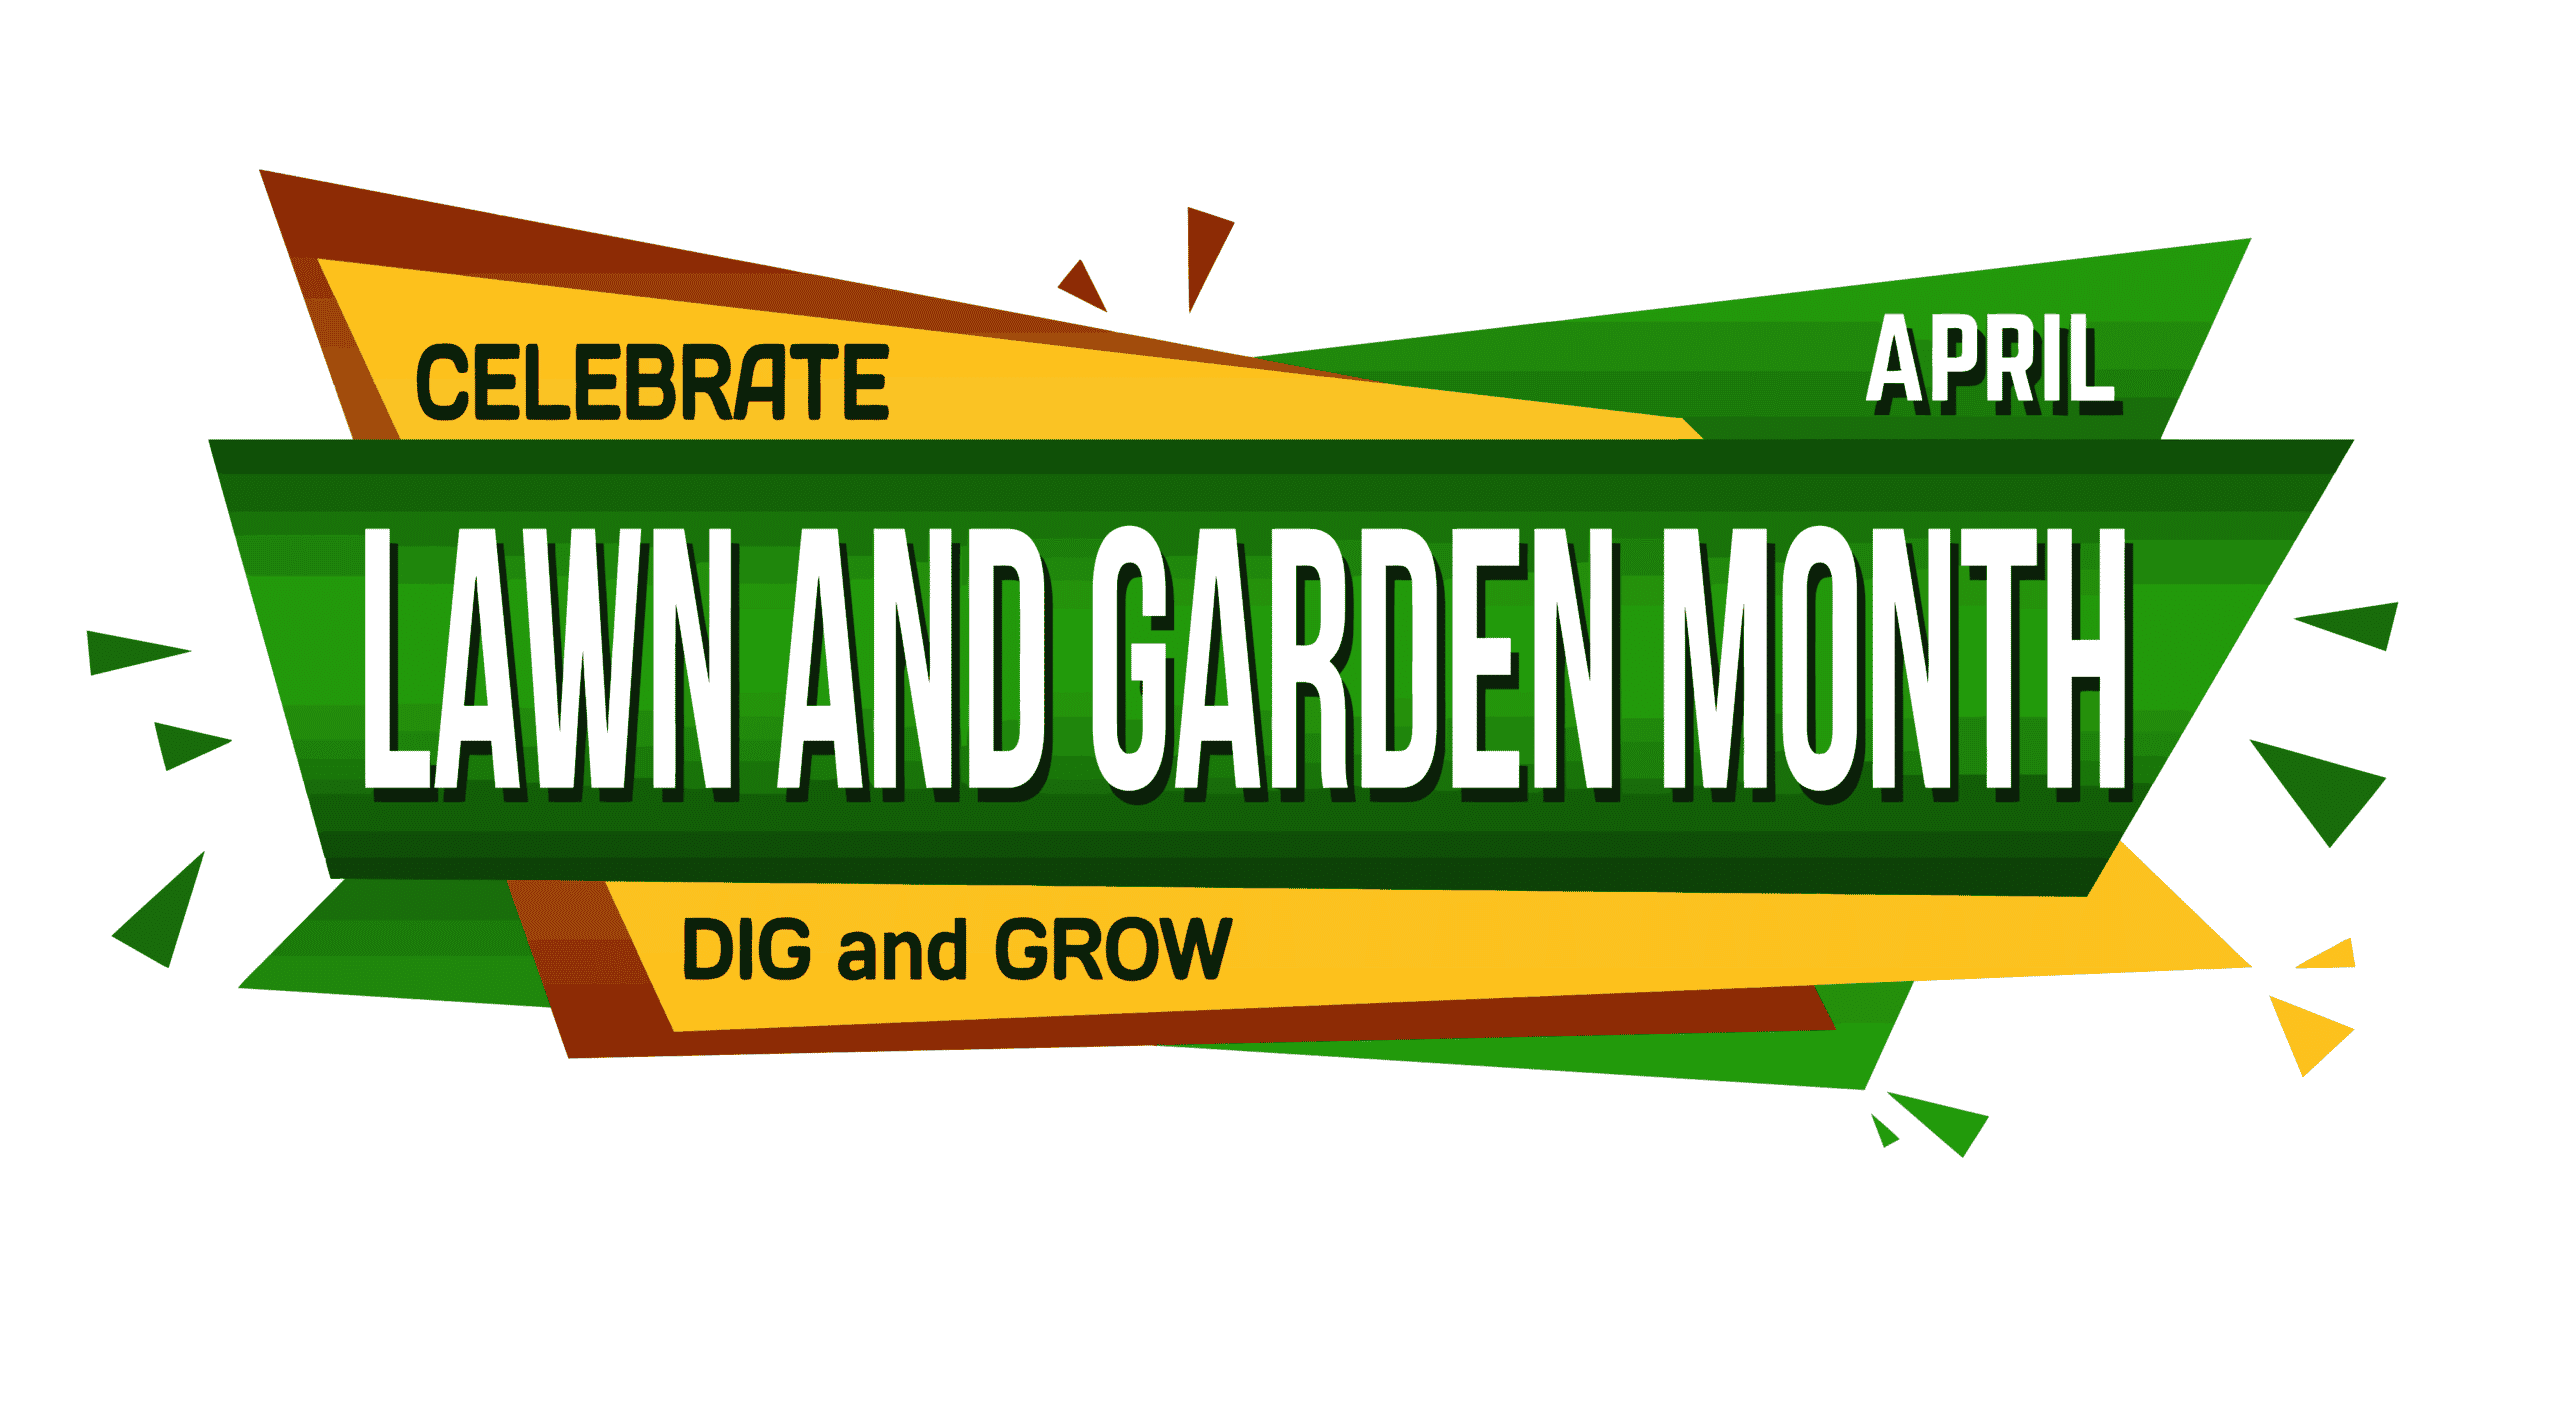 Lawn and Garden Month